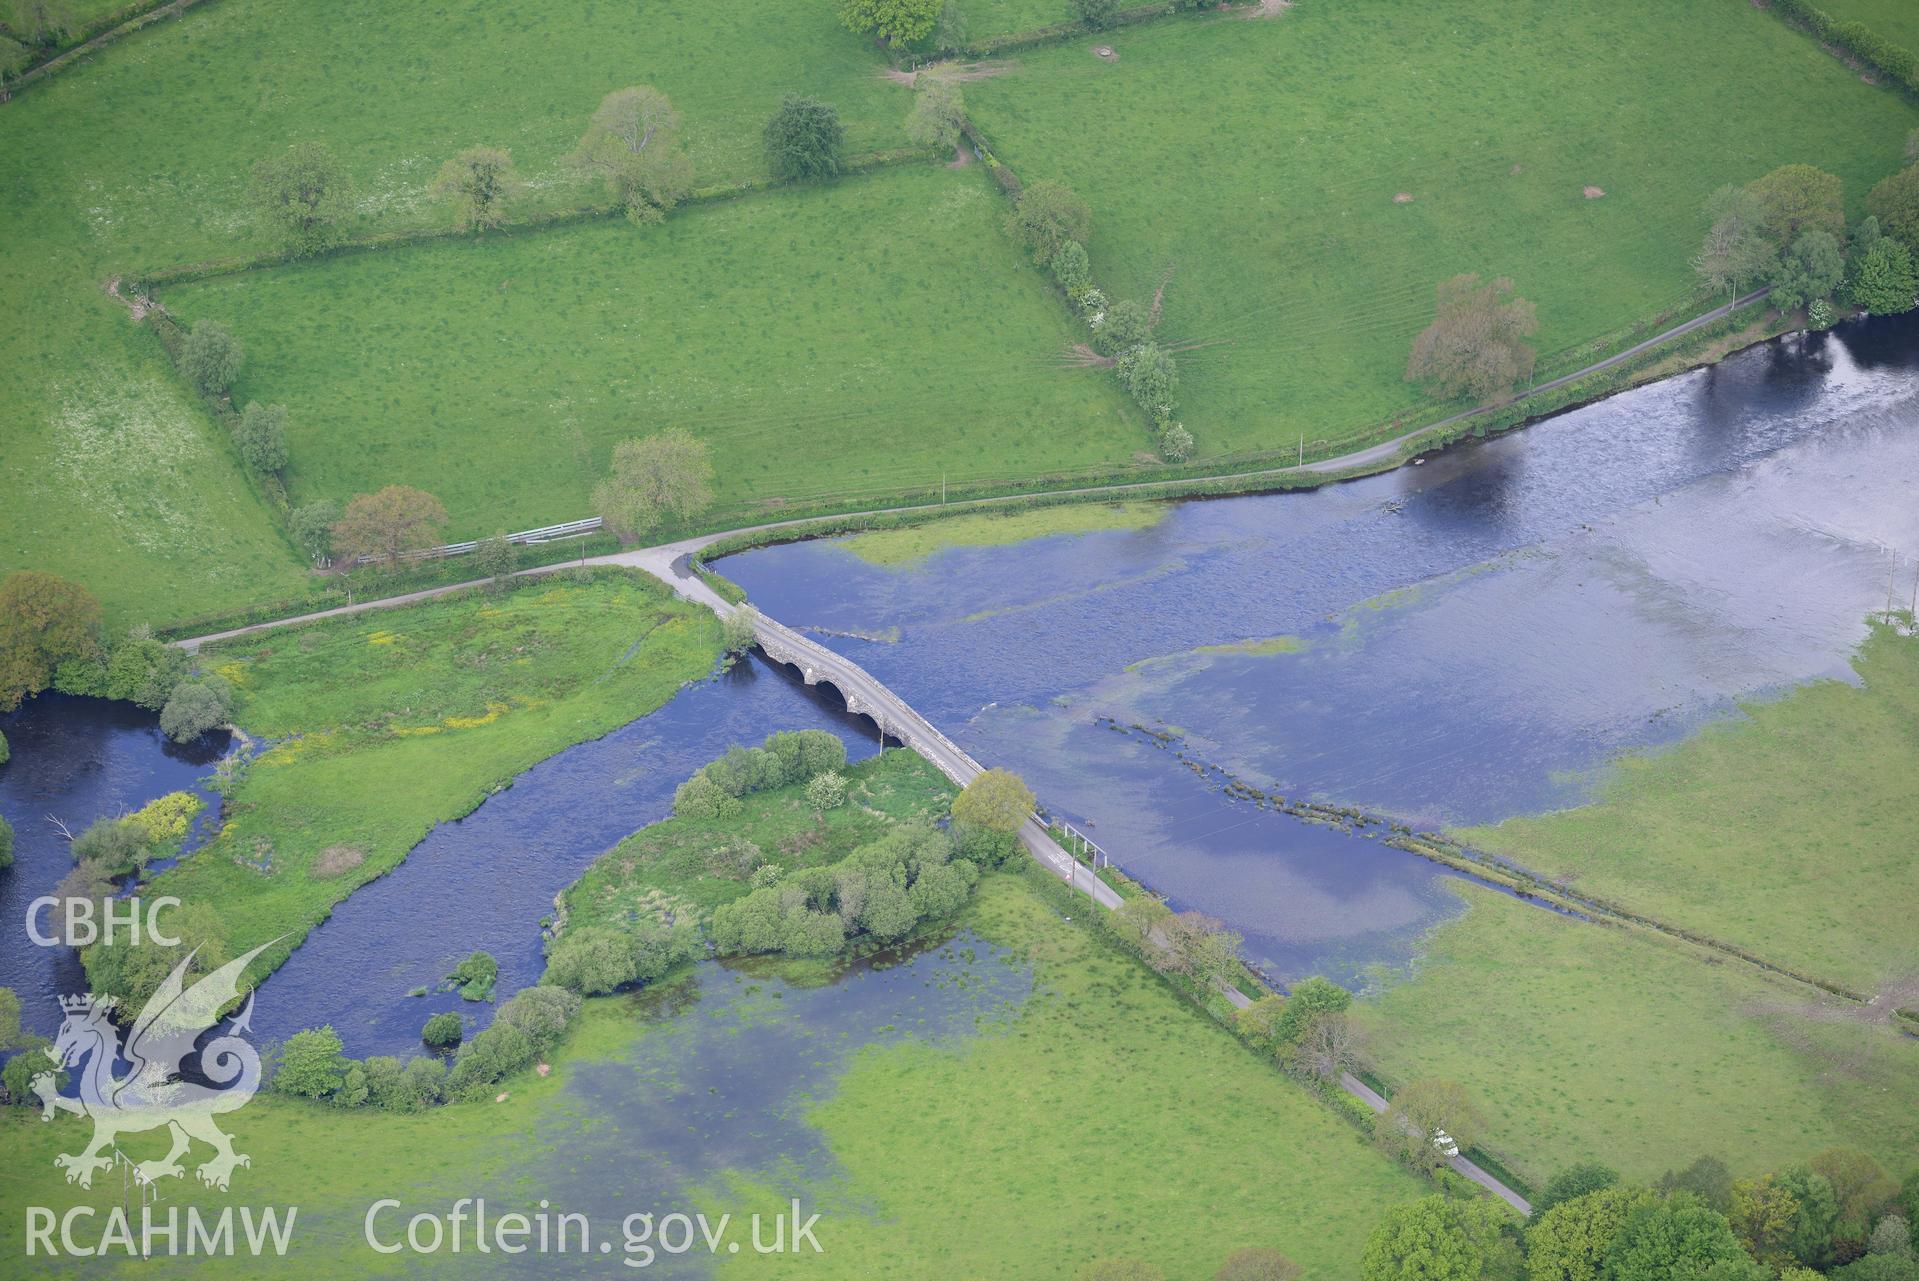 Flooding near Pont Gogoyan, Llanddewi Brefi. Oblique aerial photograph taken during the Royal Commission's programme of archaeological aerial reconnaissance by Toby Driver on 3rd June 2015.